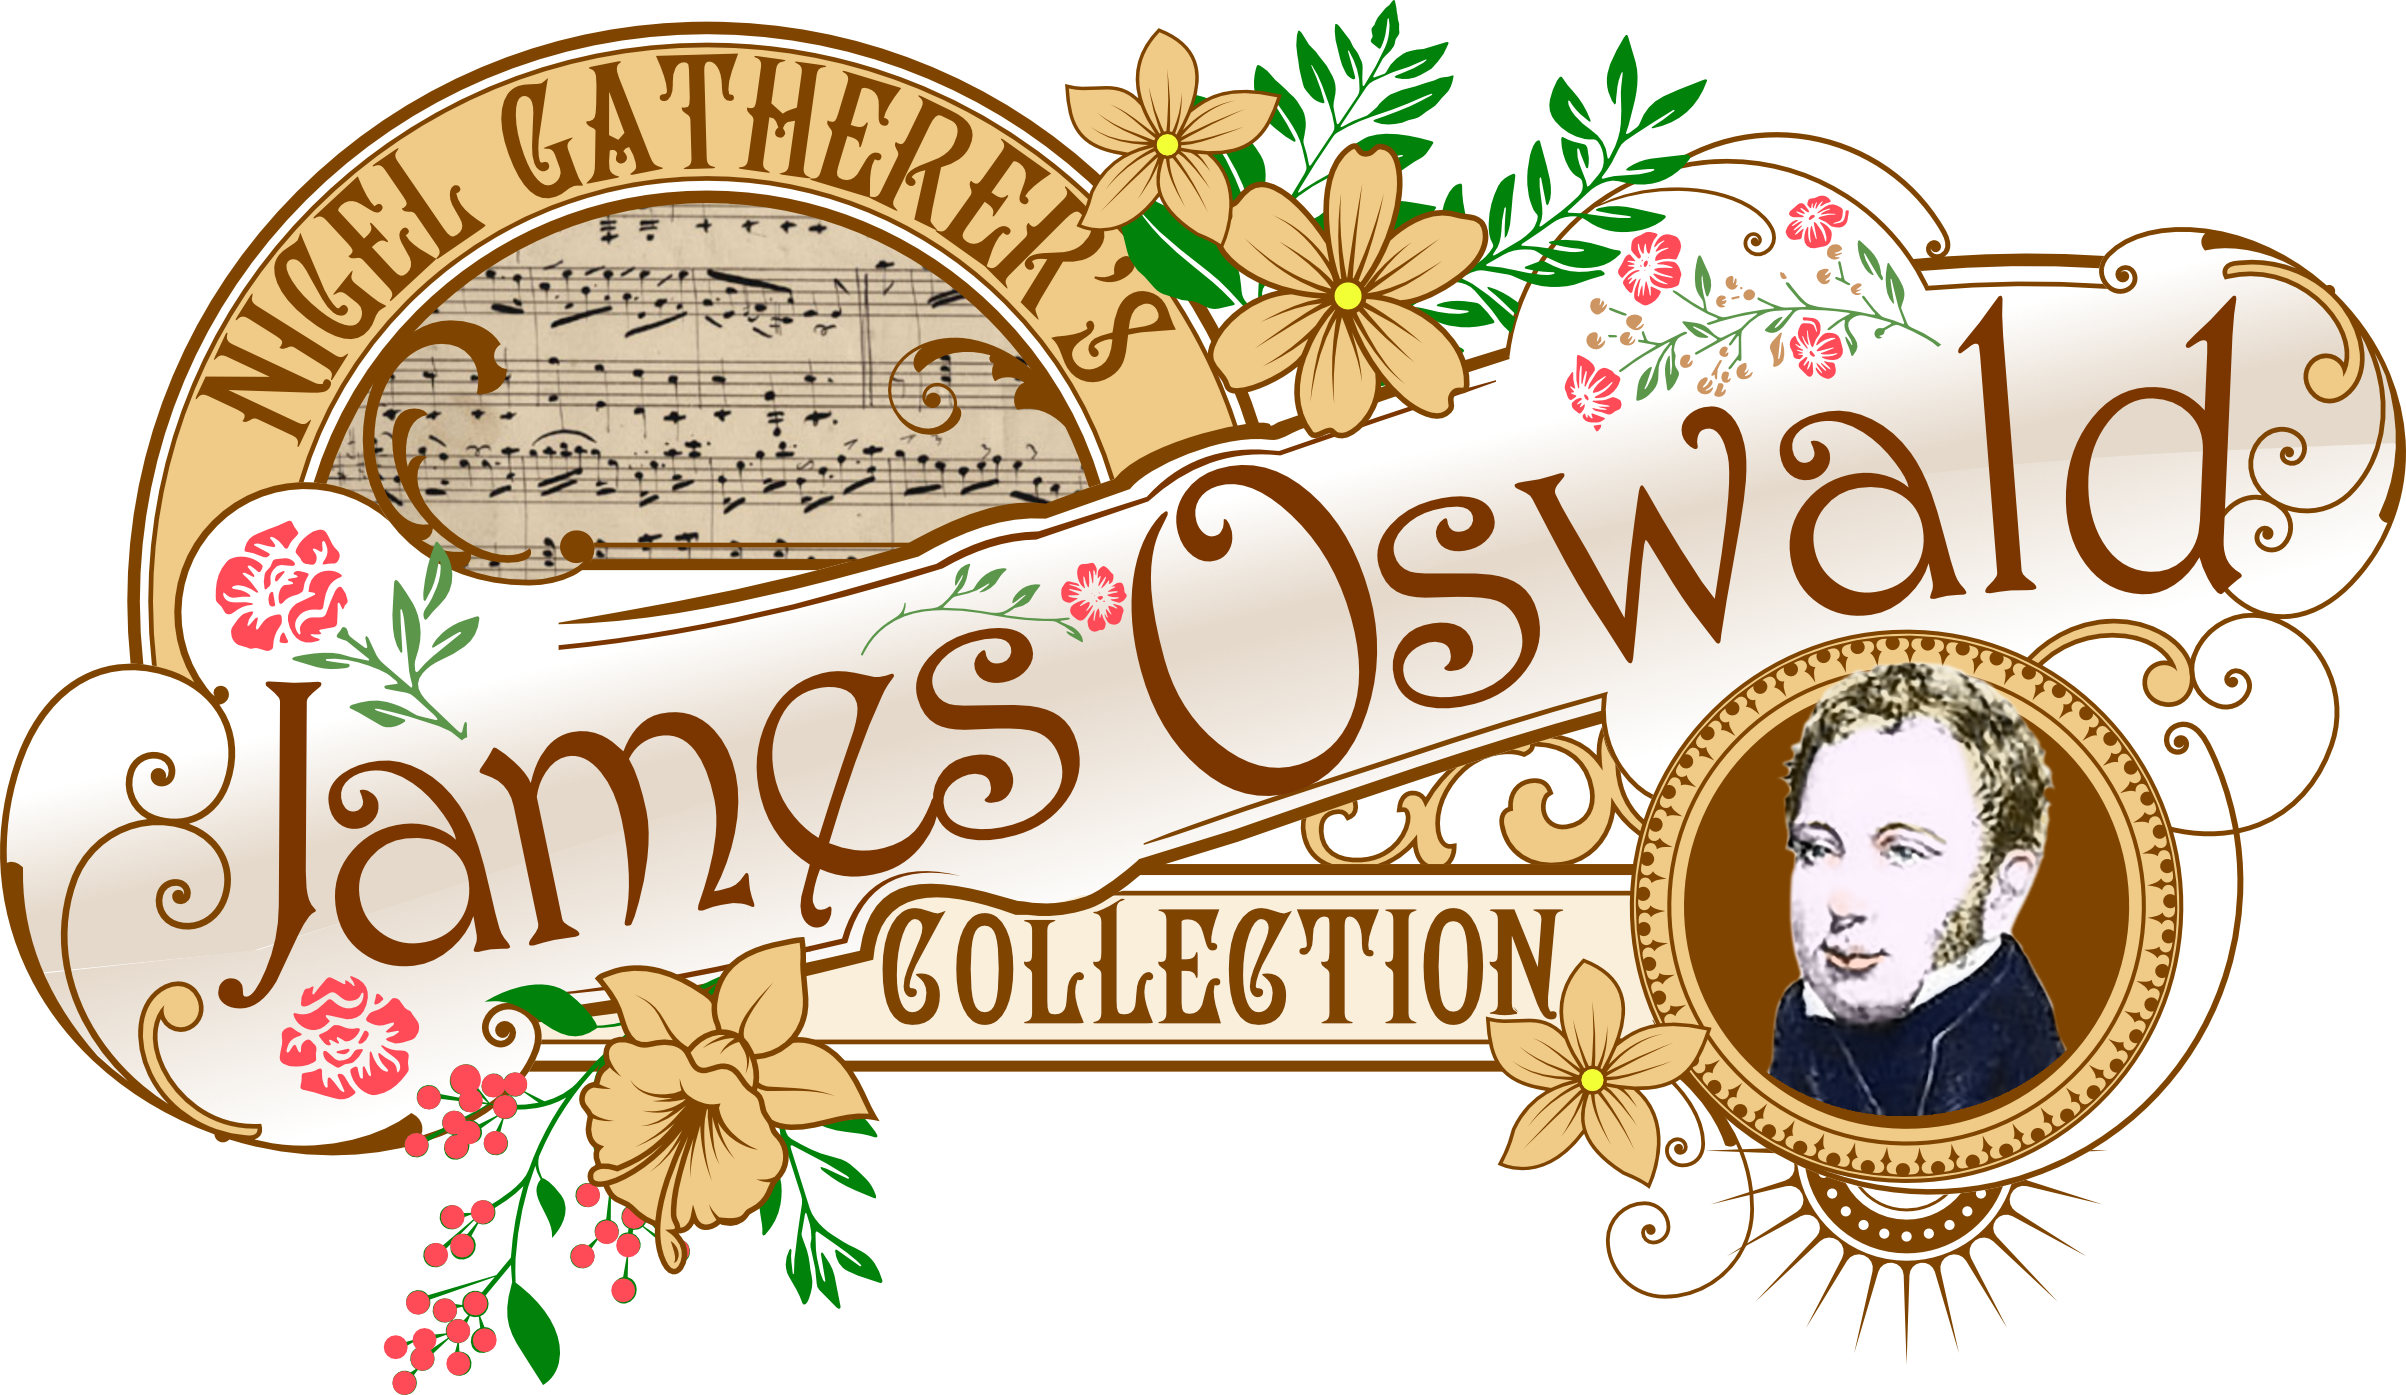 James Oswald Collection